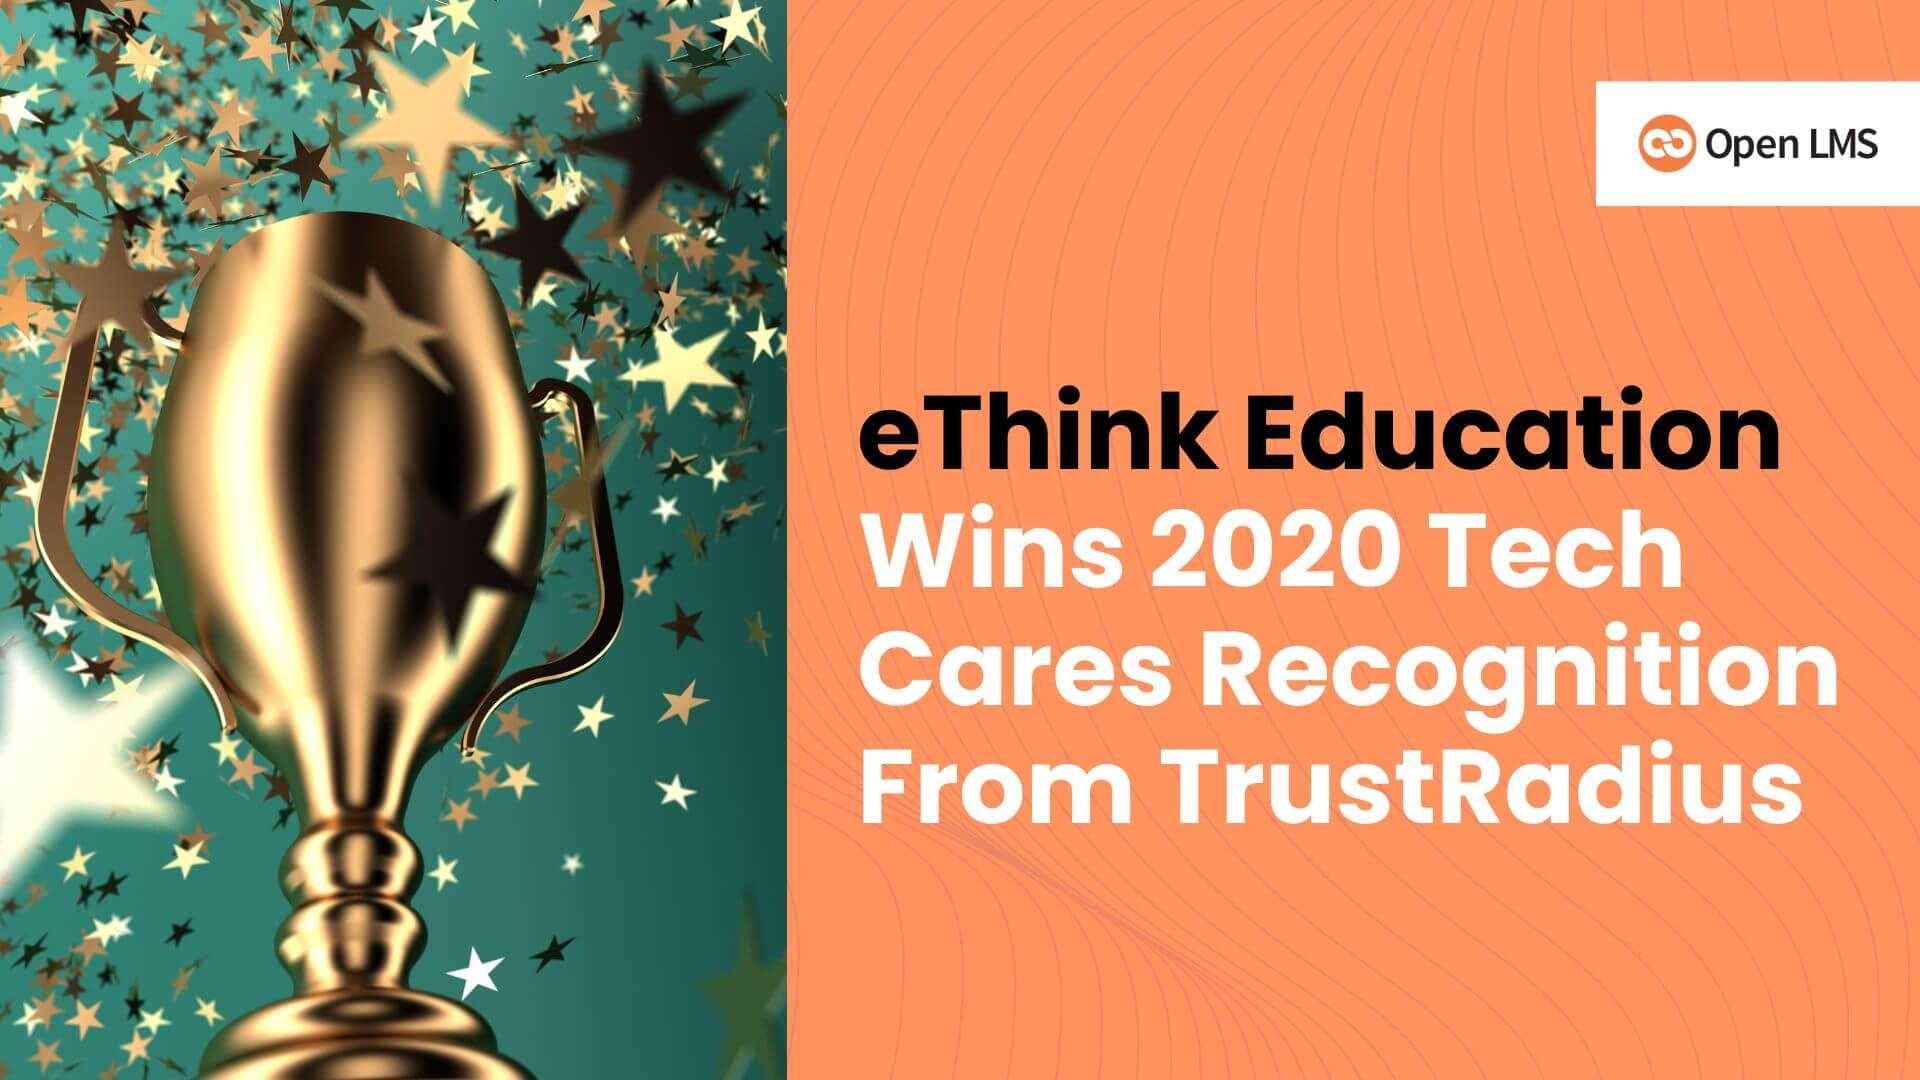 eThink Education Wins 2020 Tech Cares Recognition From TrustRadius